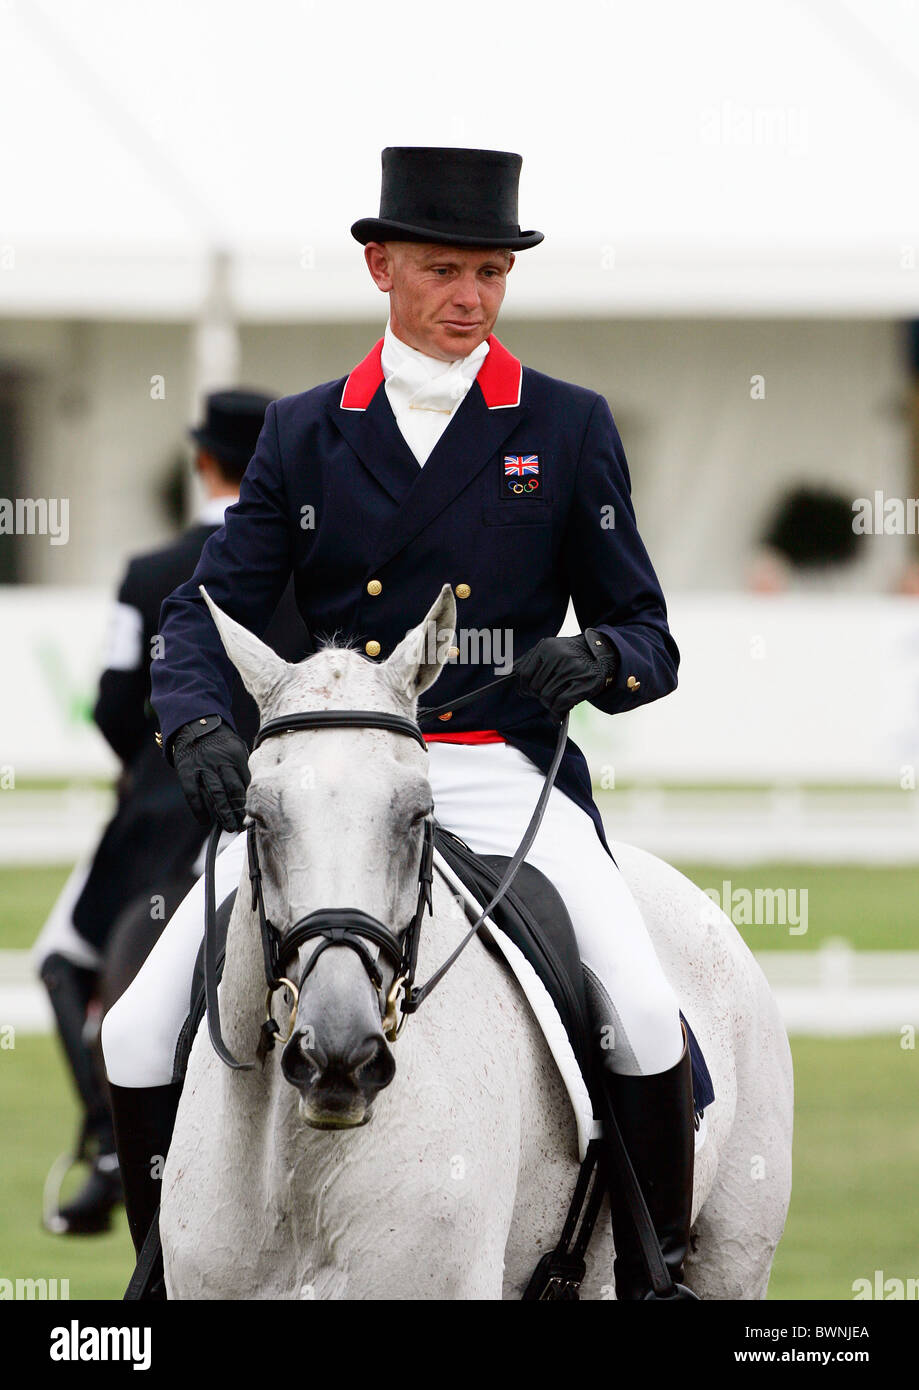 Leslie Law, Olympic Eventing Champion competes in dressage for British team at European Eventing Championships, Blenheim Palace Stock Photo